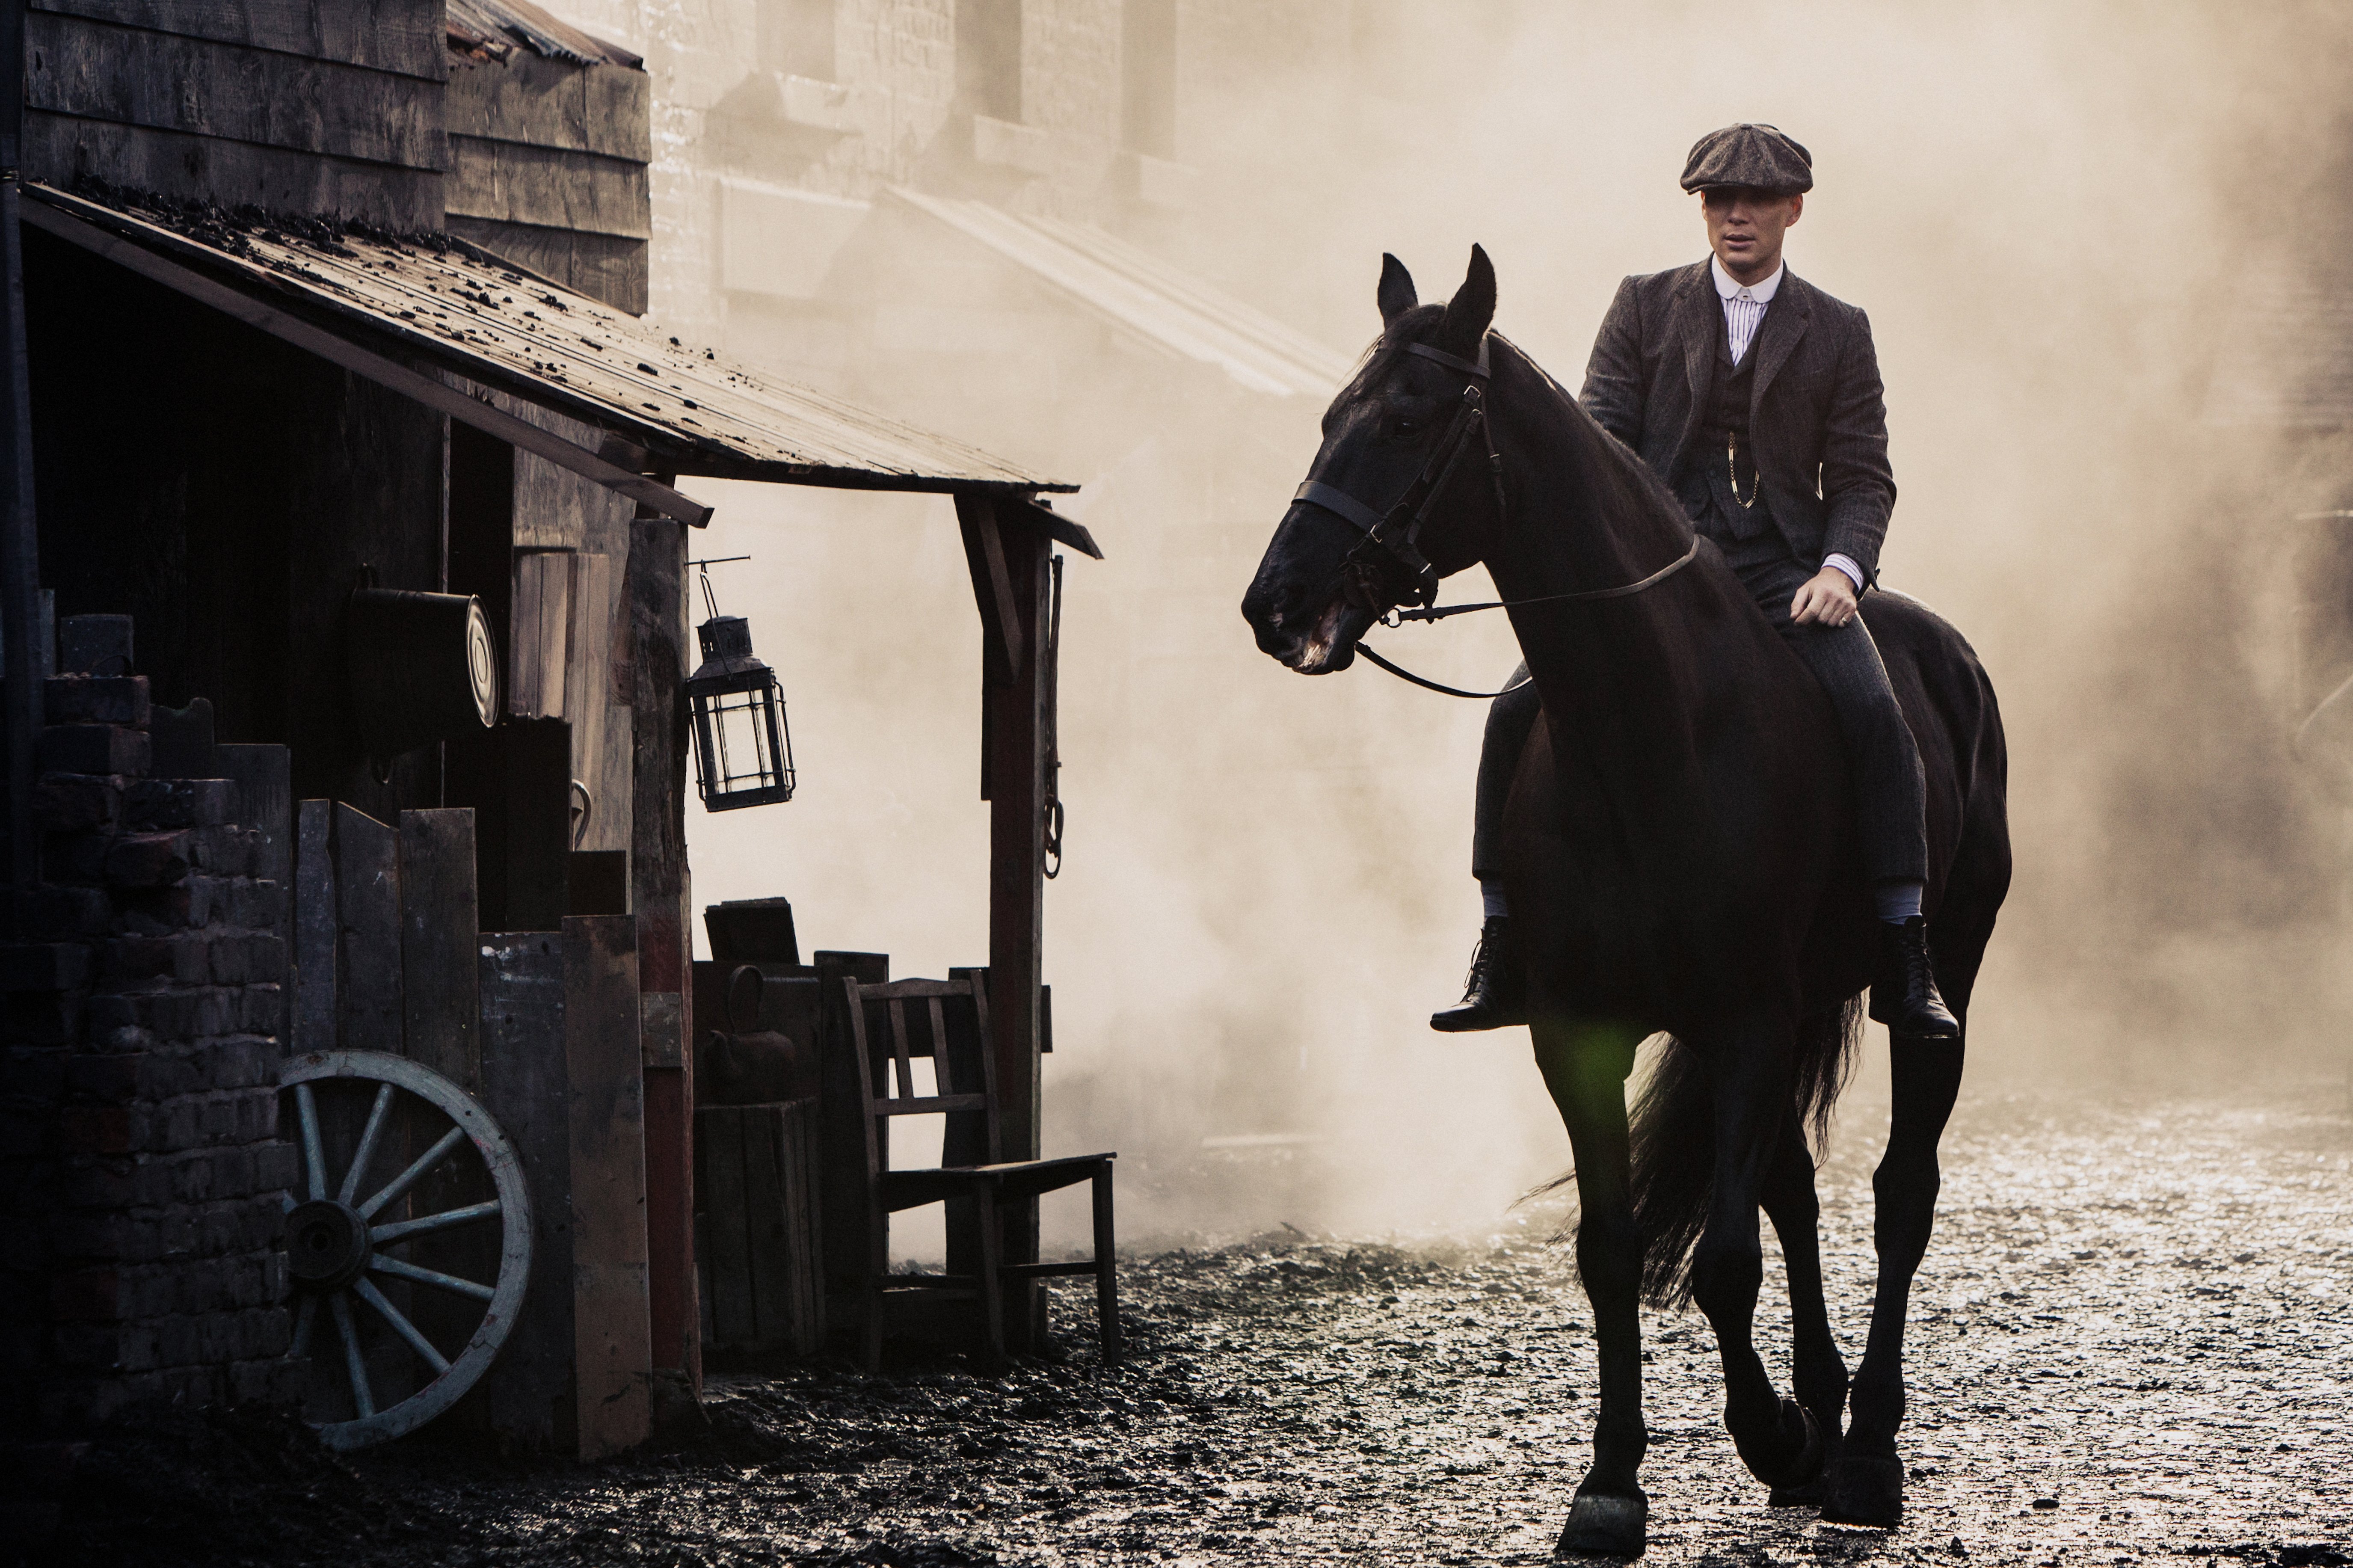 Peaky Blinders wallpaper for desktop, download free Peaky Blinders picture and background for PC